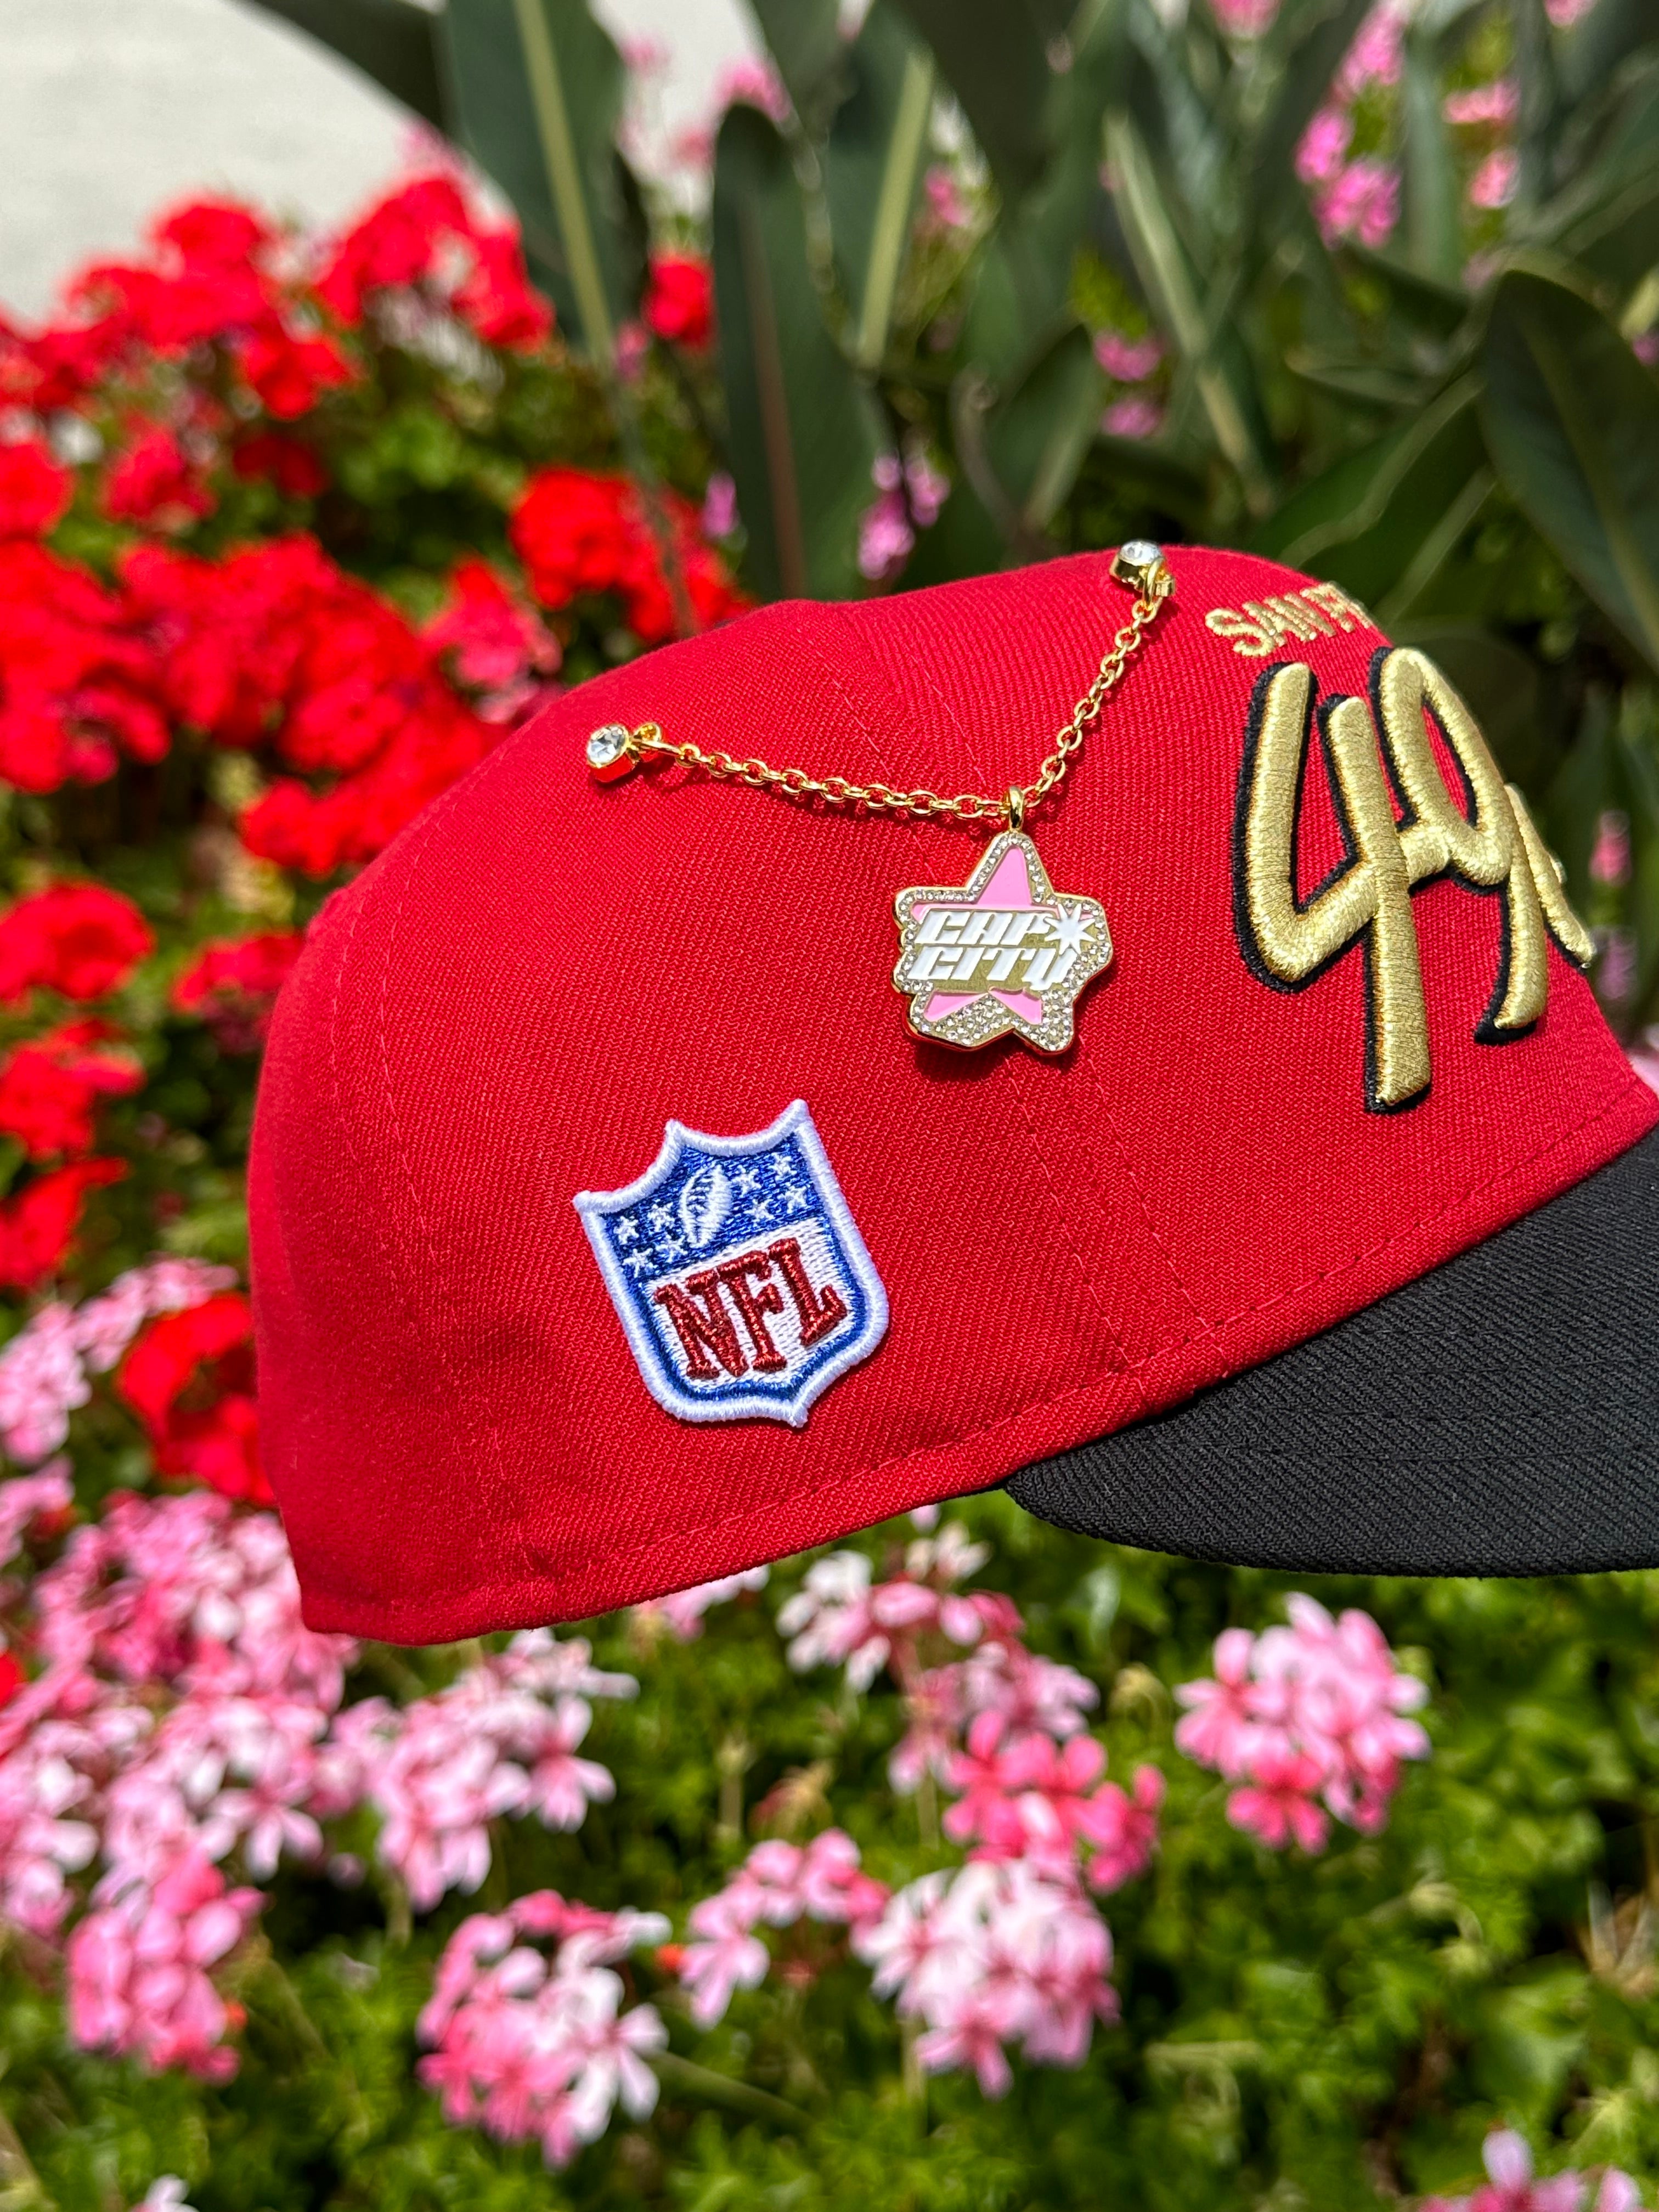 NEW ERA EXCLUSIVE 59FIFTY RED/BLACK SAN FRANSICO "49ERS" SCRIPT W/ NFL LOGO SIDE PATCH